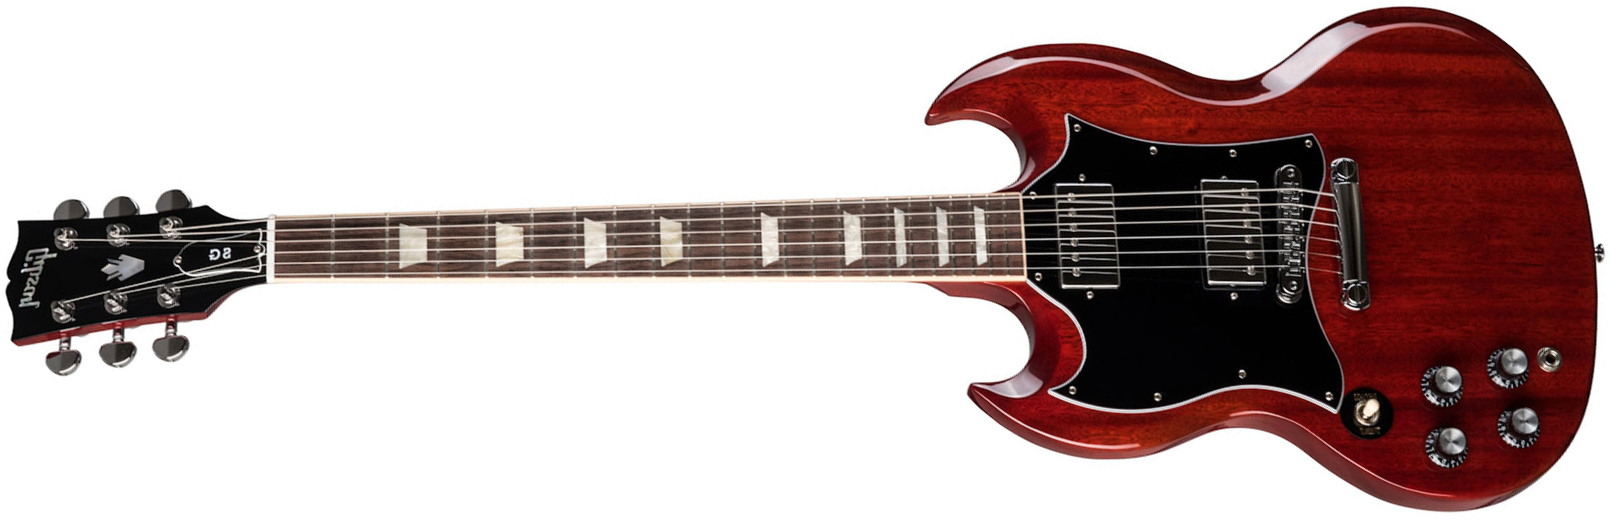 Gibson Sg Standard Lh Gaucher 2h Ht Rw - Heritage Cherry - Left-handed electric guitar - Main picture